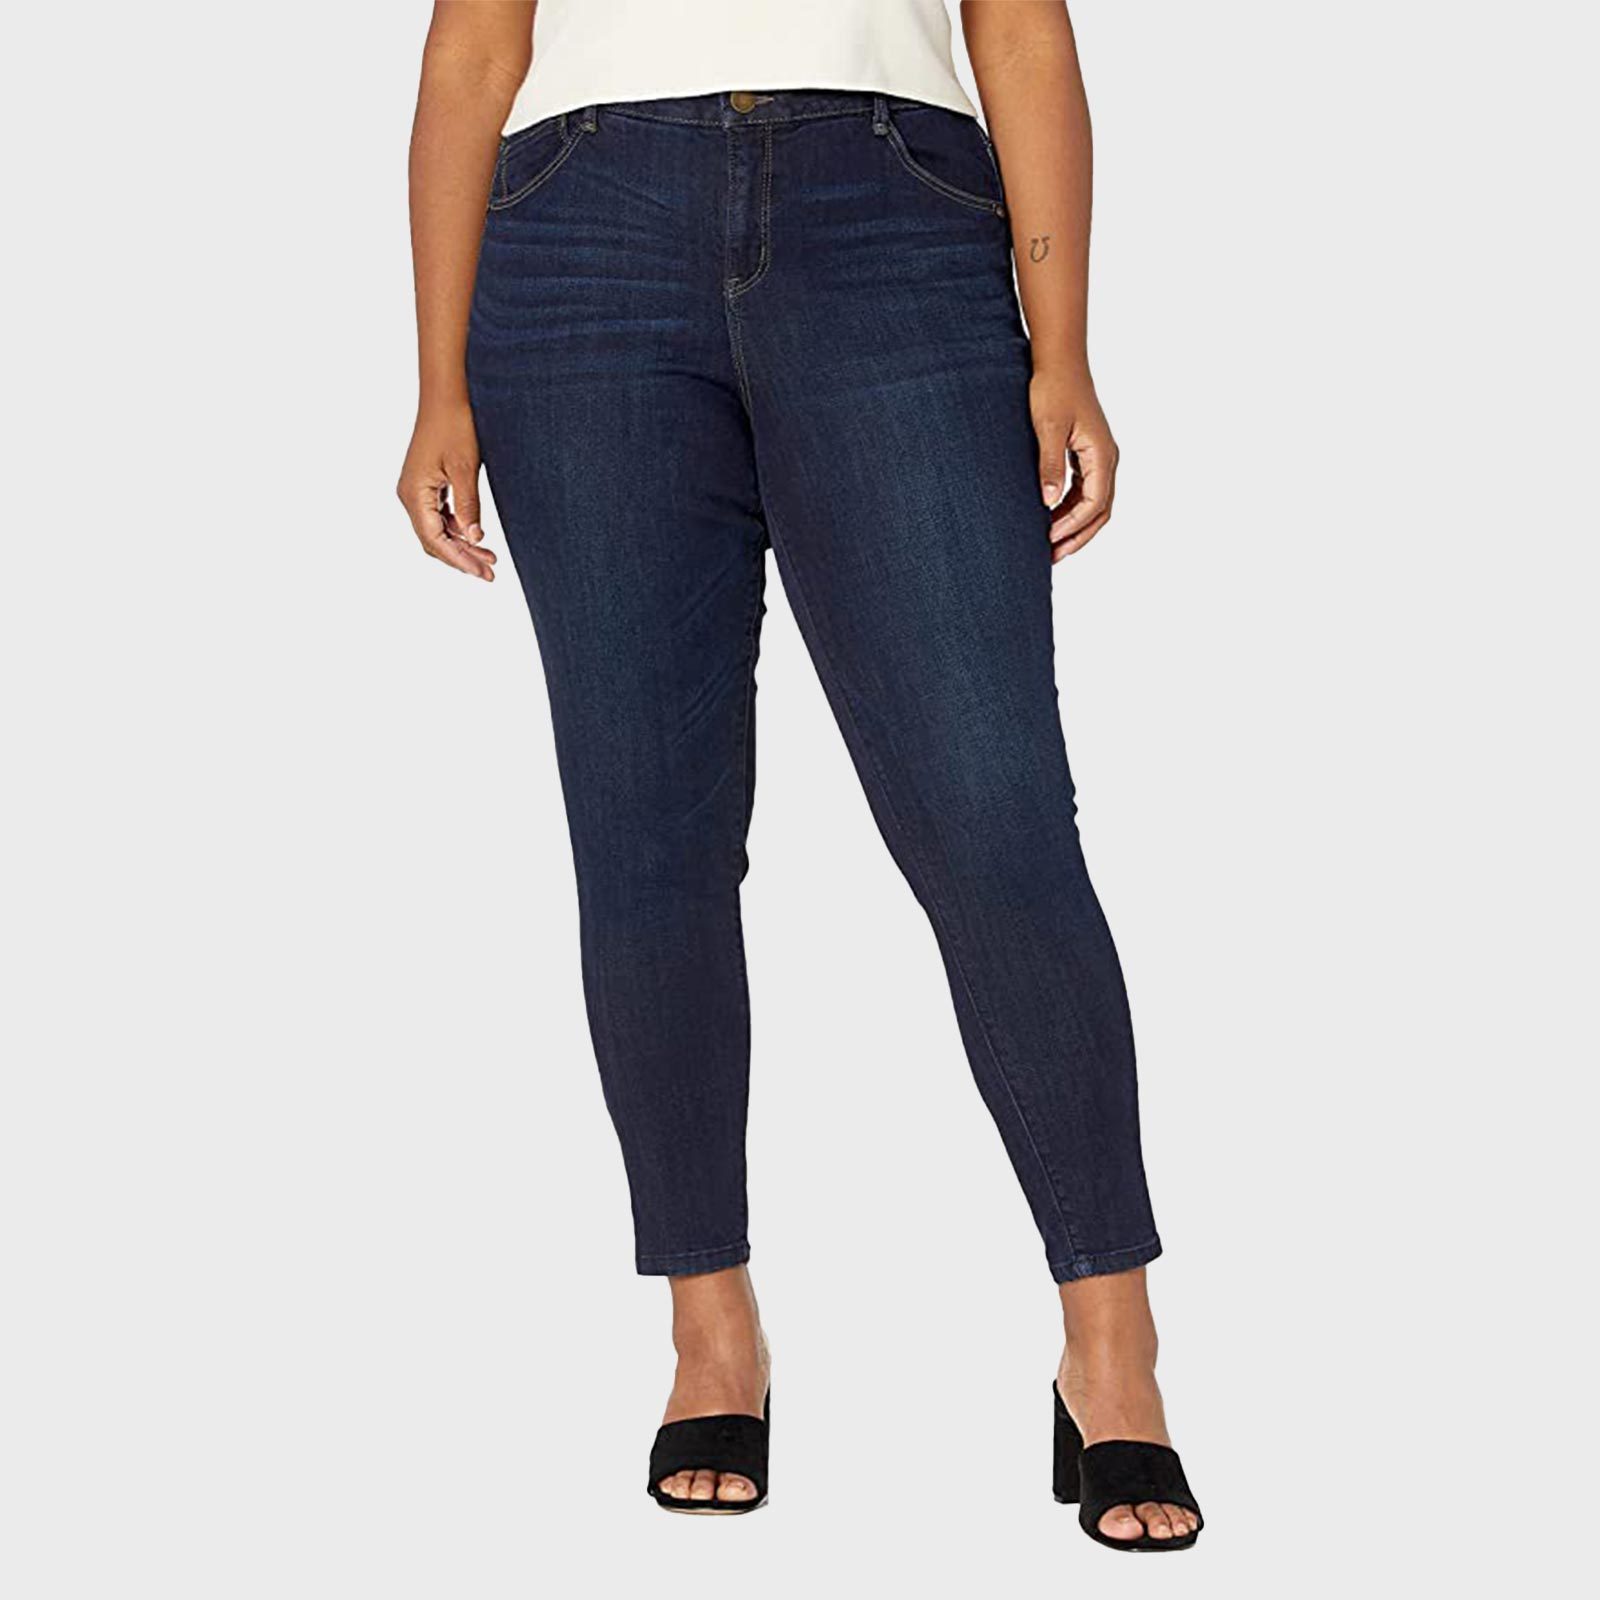 Plus size high-rise jegging